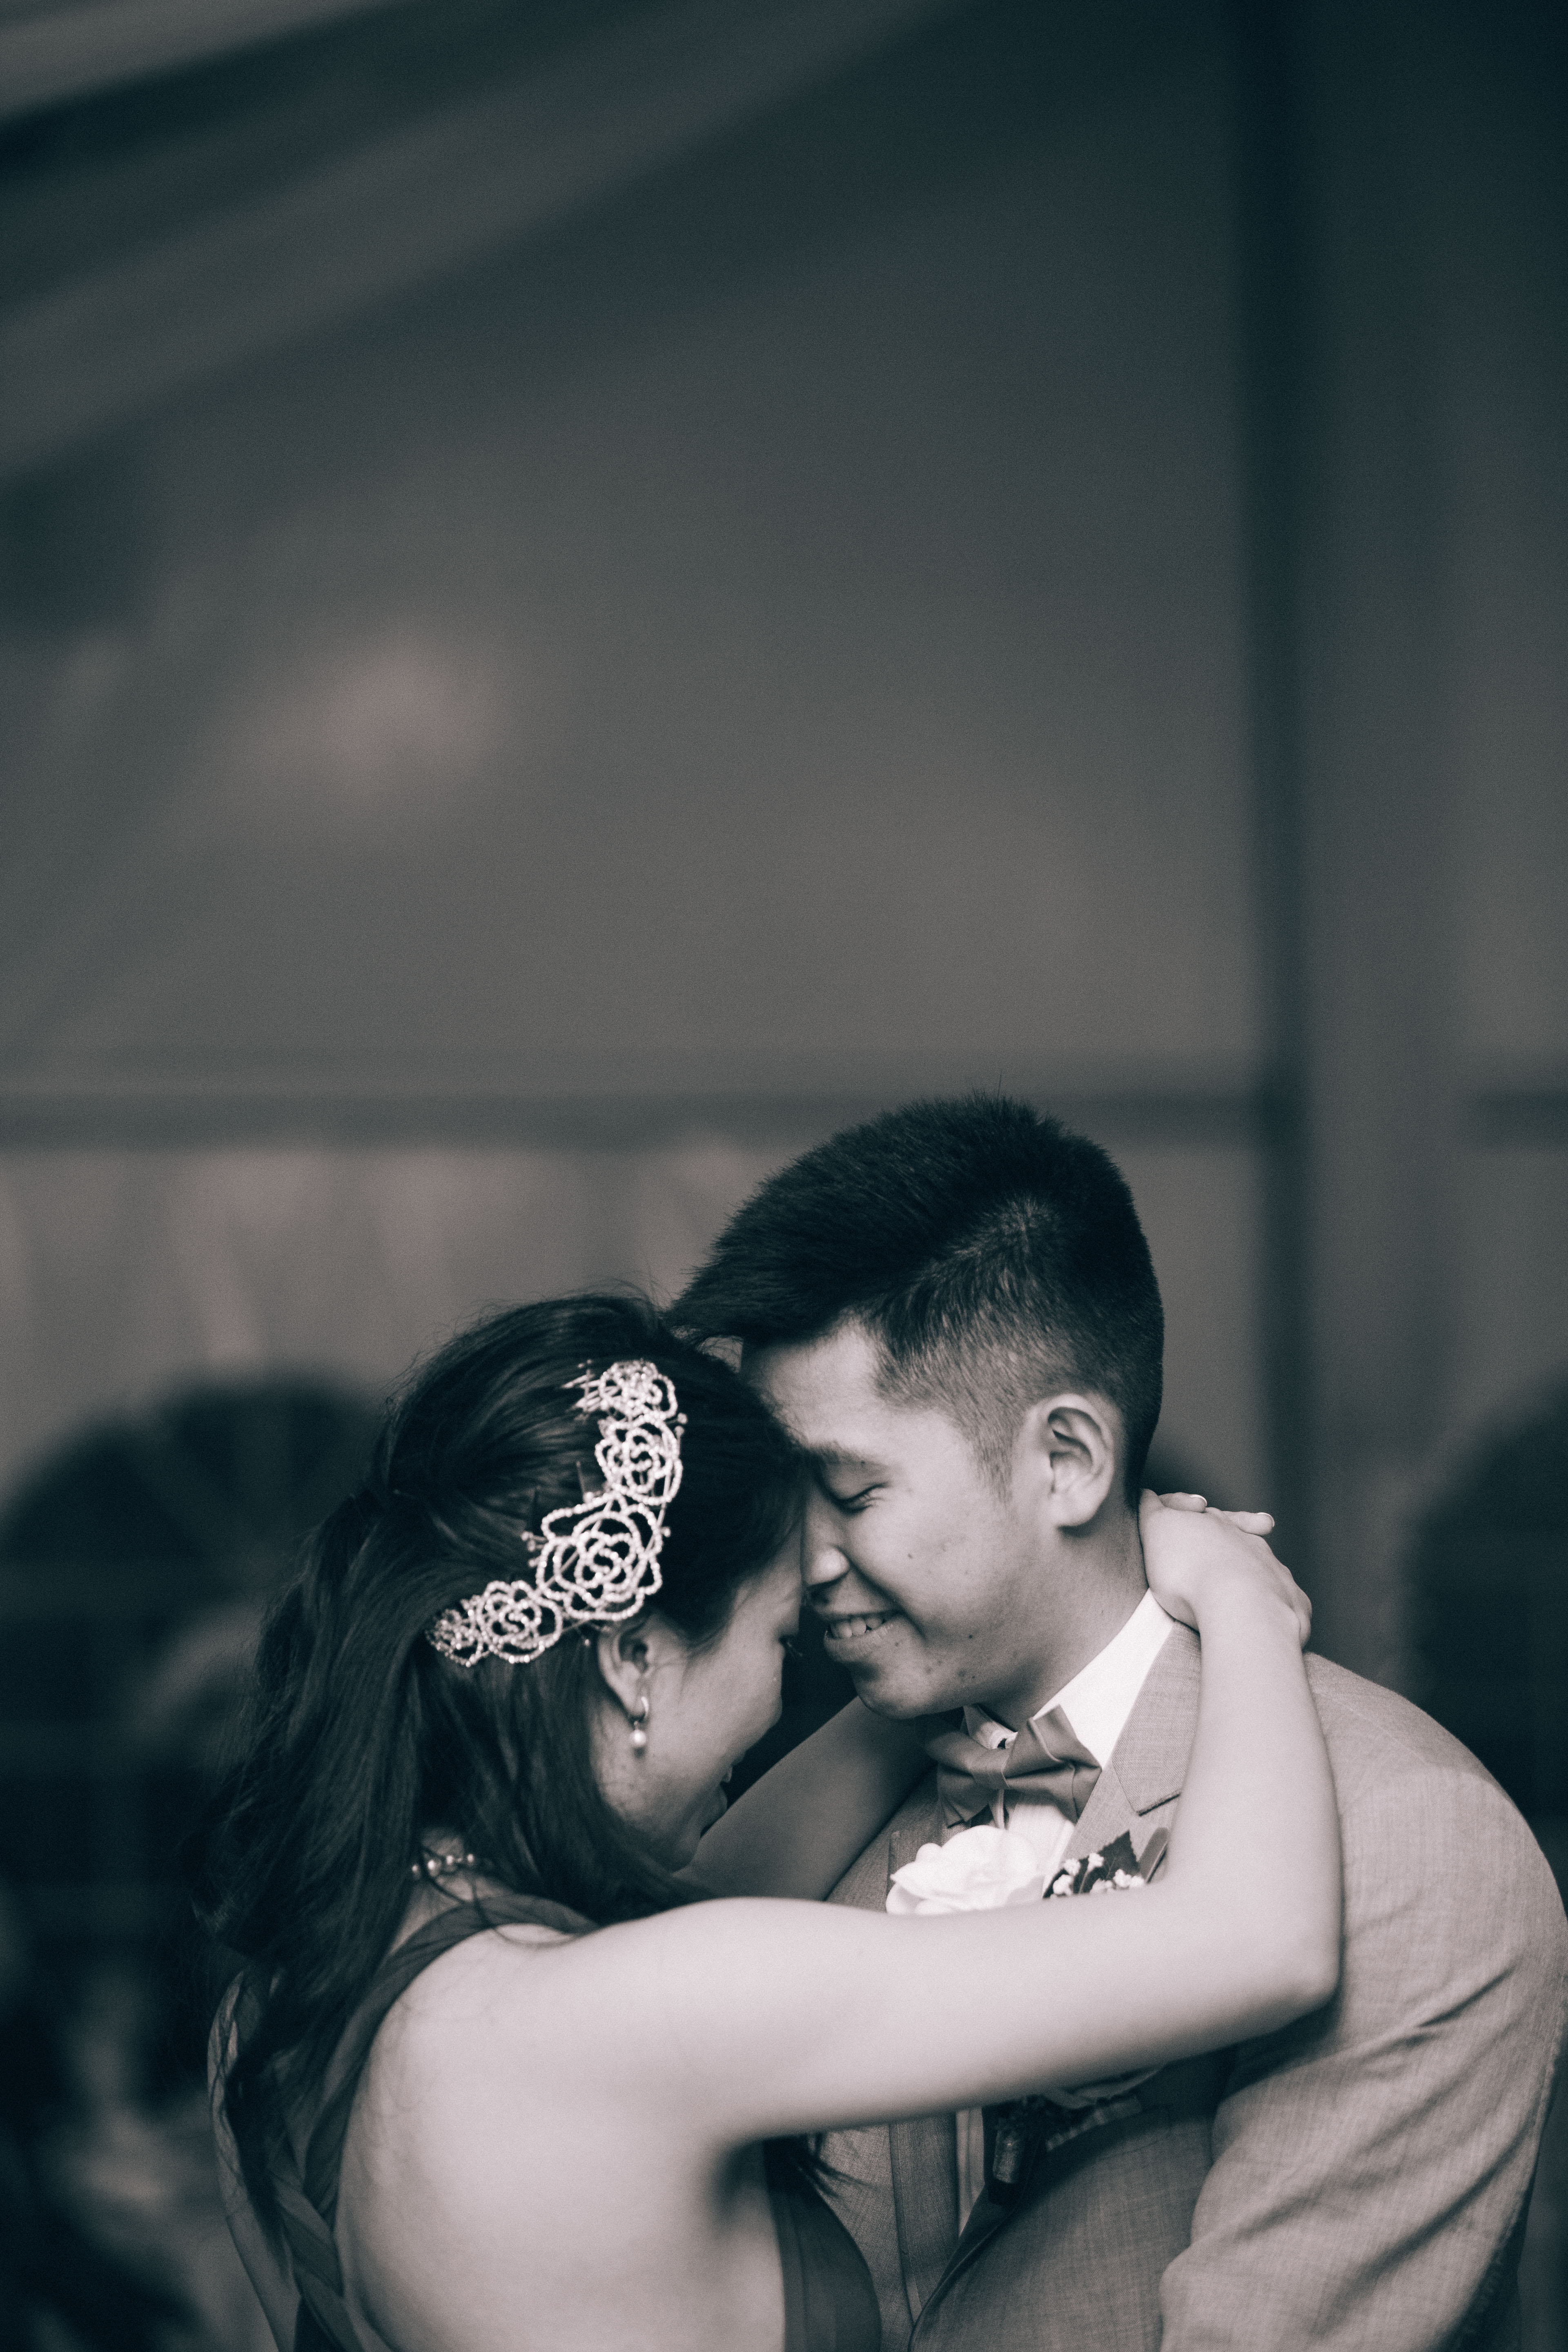 Chinese bride and groom sharing a tender moment while dancing first dance at wedding reception at the Mandarin Country Club